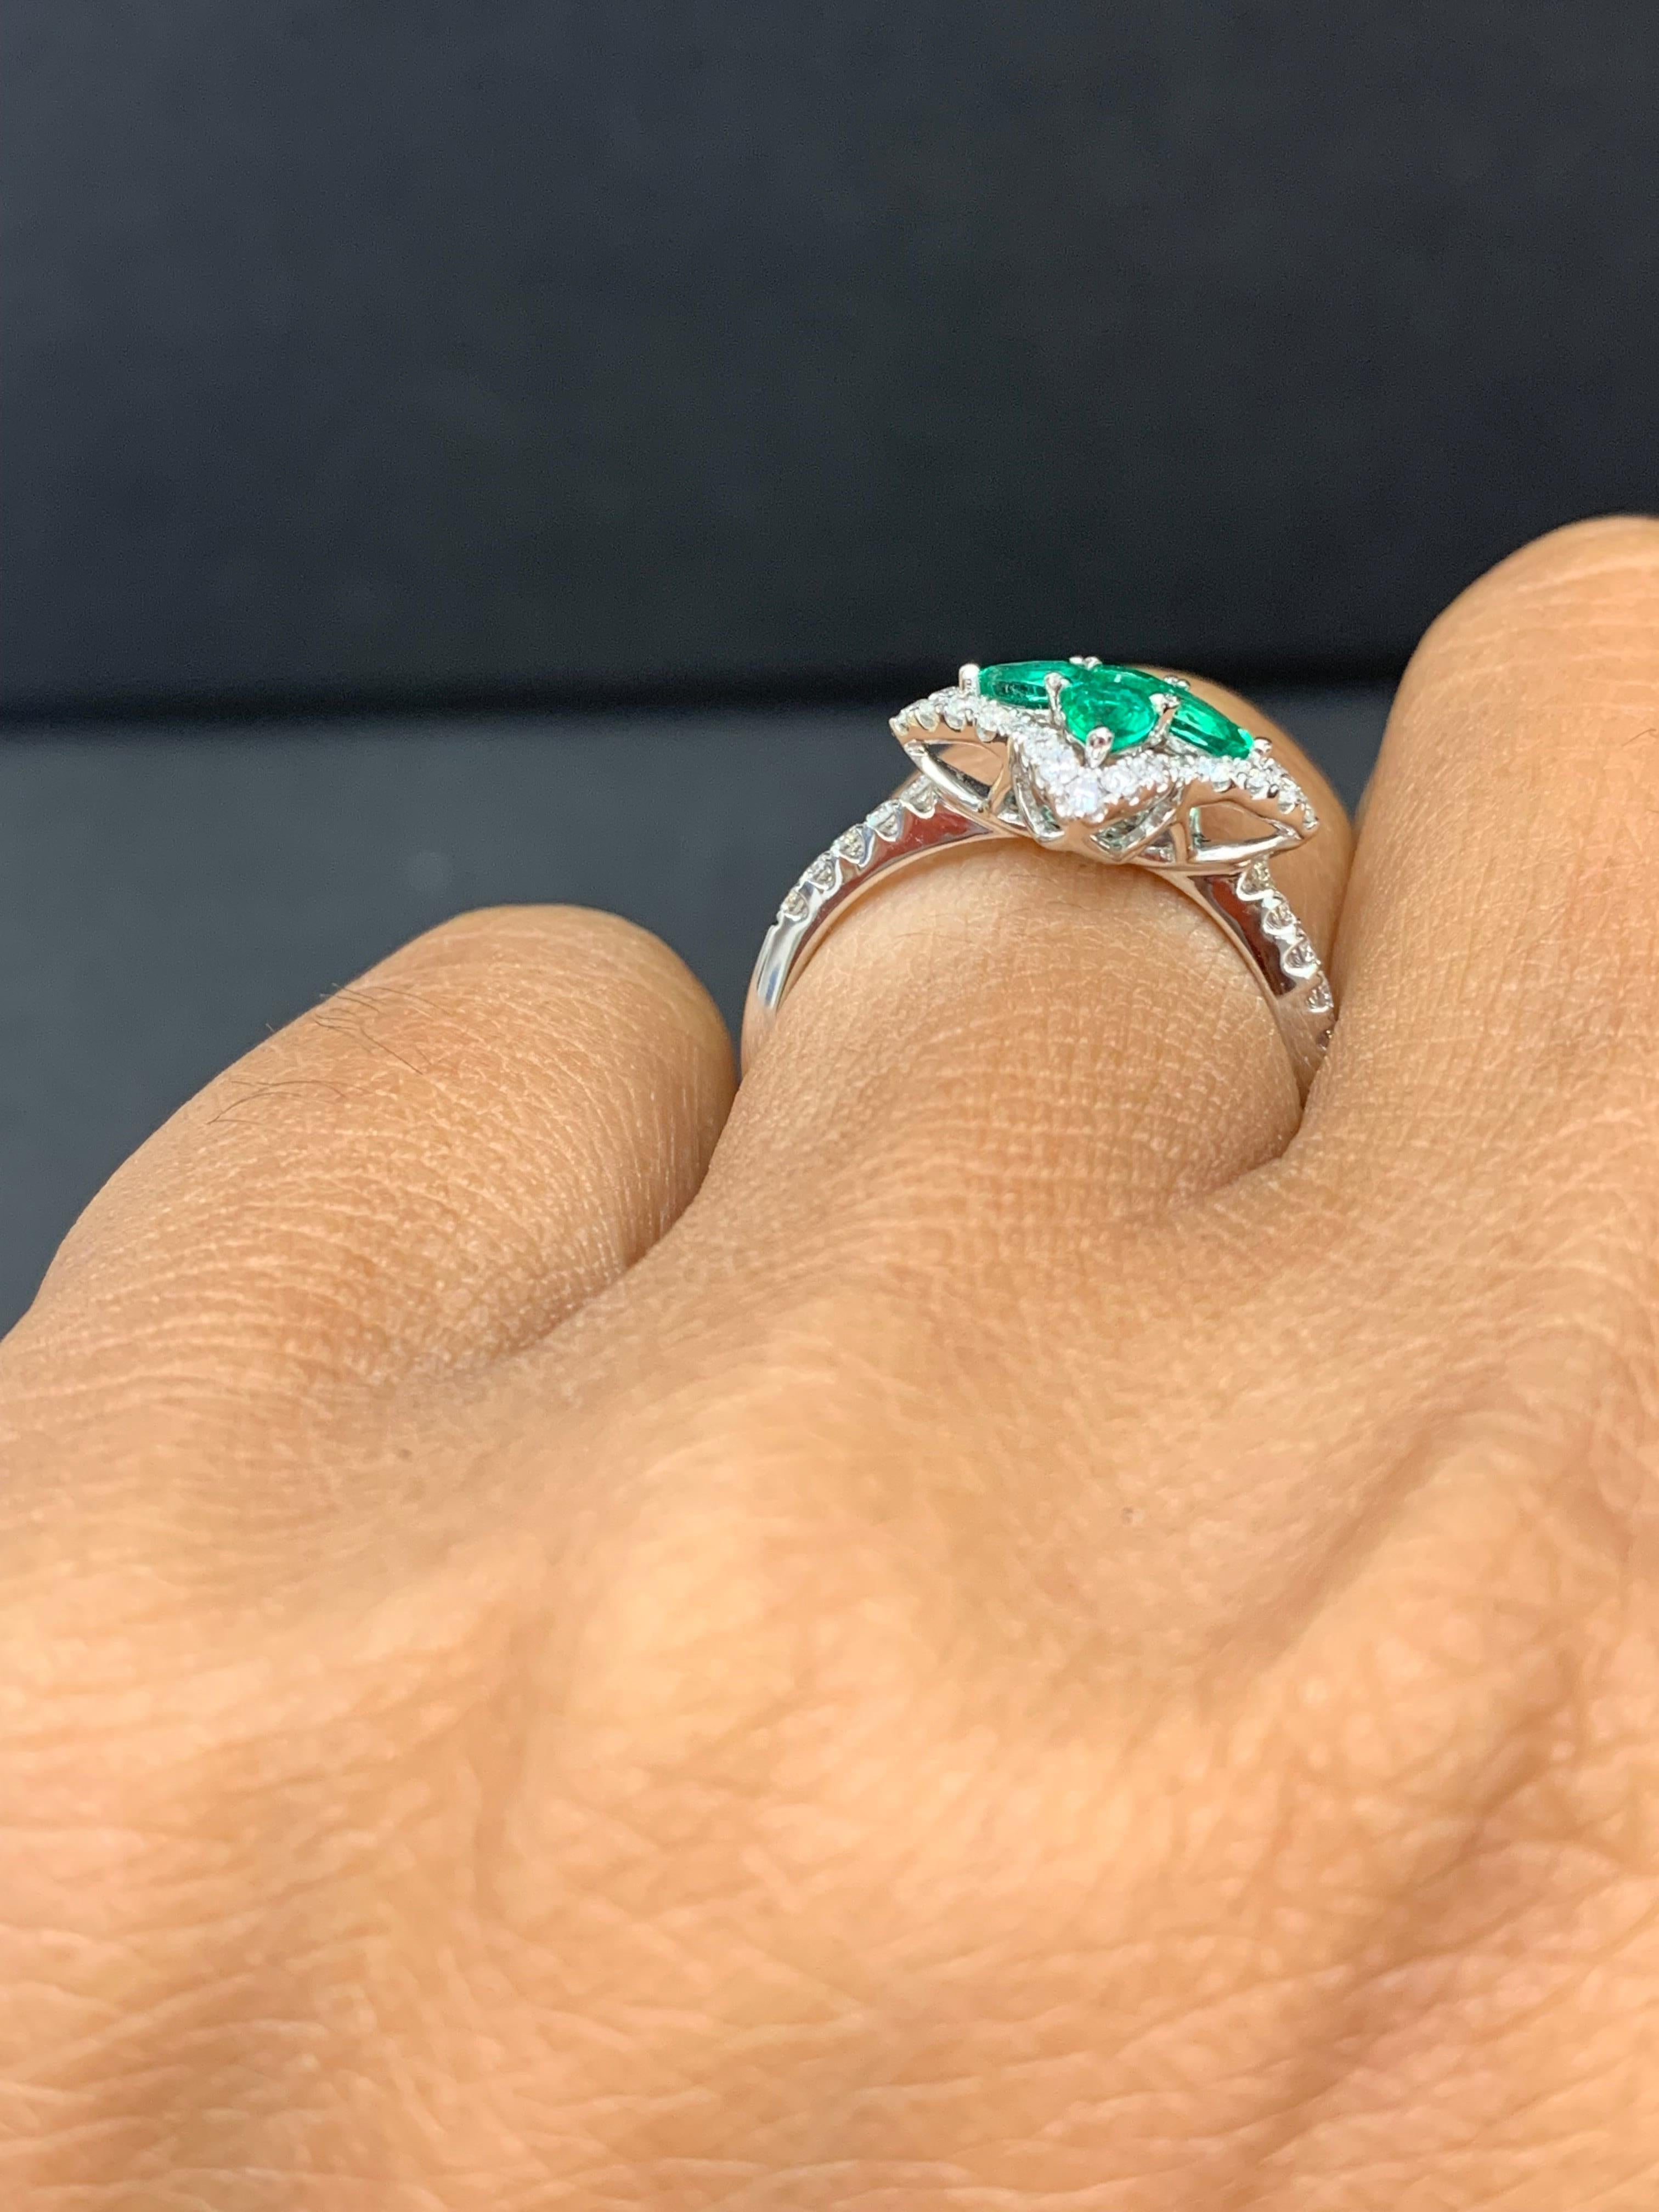 0.56 Carat Pear Shape Emerald and Diamond Cocktail Ring in 18K White Gold For Sale 6